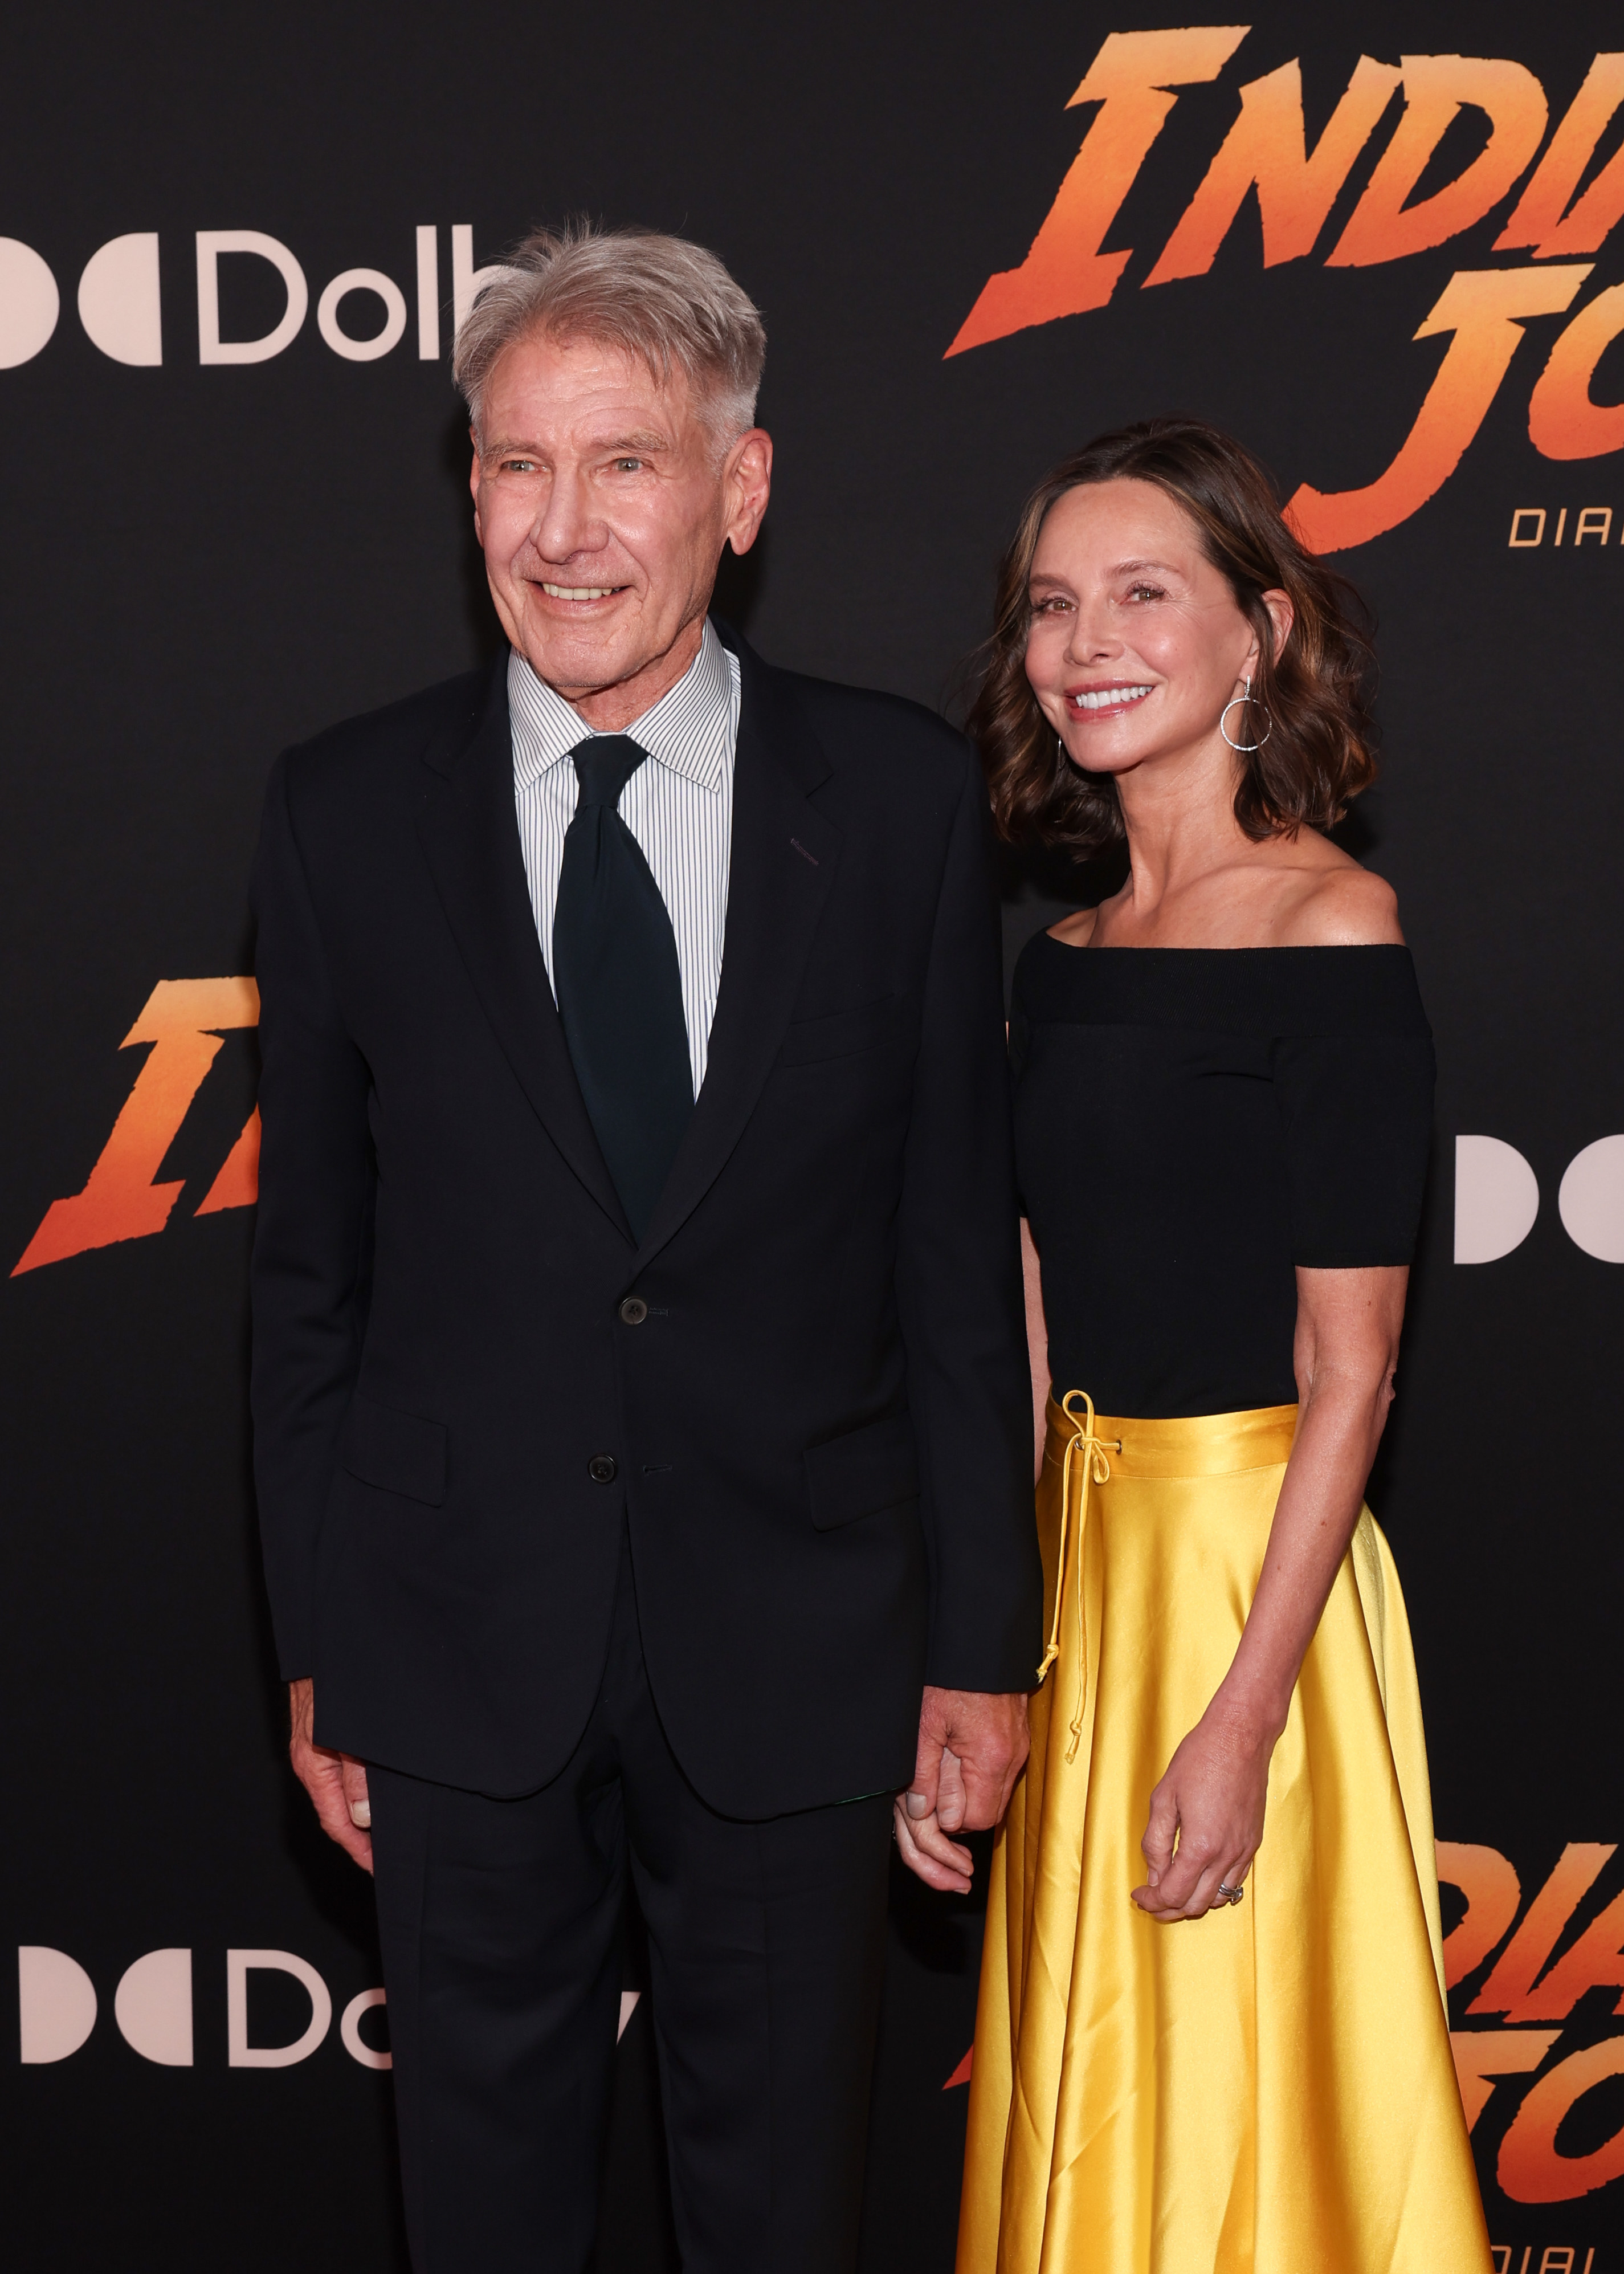 Harrison Ford holds hands with his wife, actress Calista Flockhart, on the red carpet